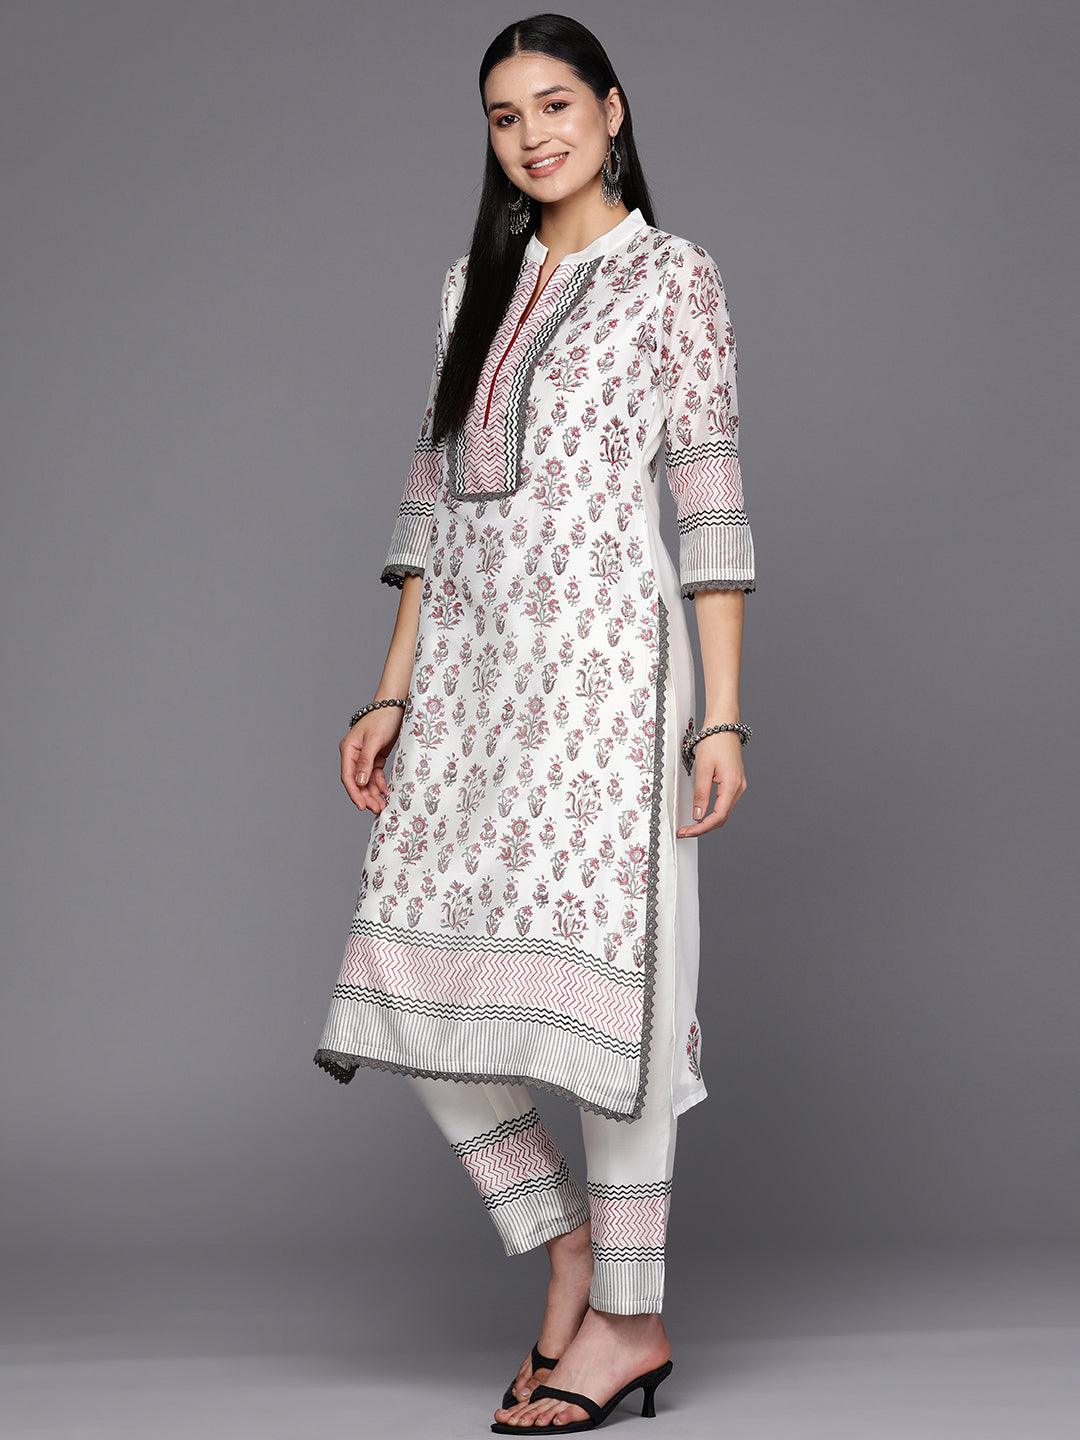 Off White Printed Chanderi Silk Straight Suit Set With Trousers - Libas